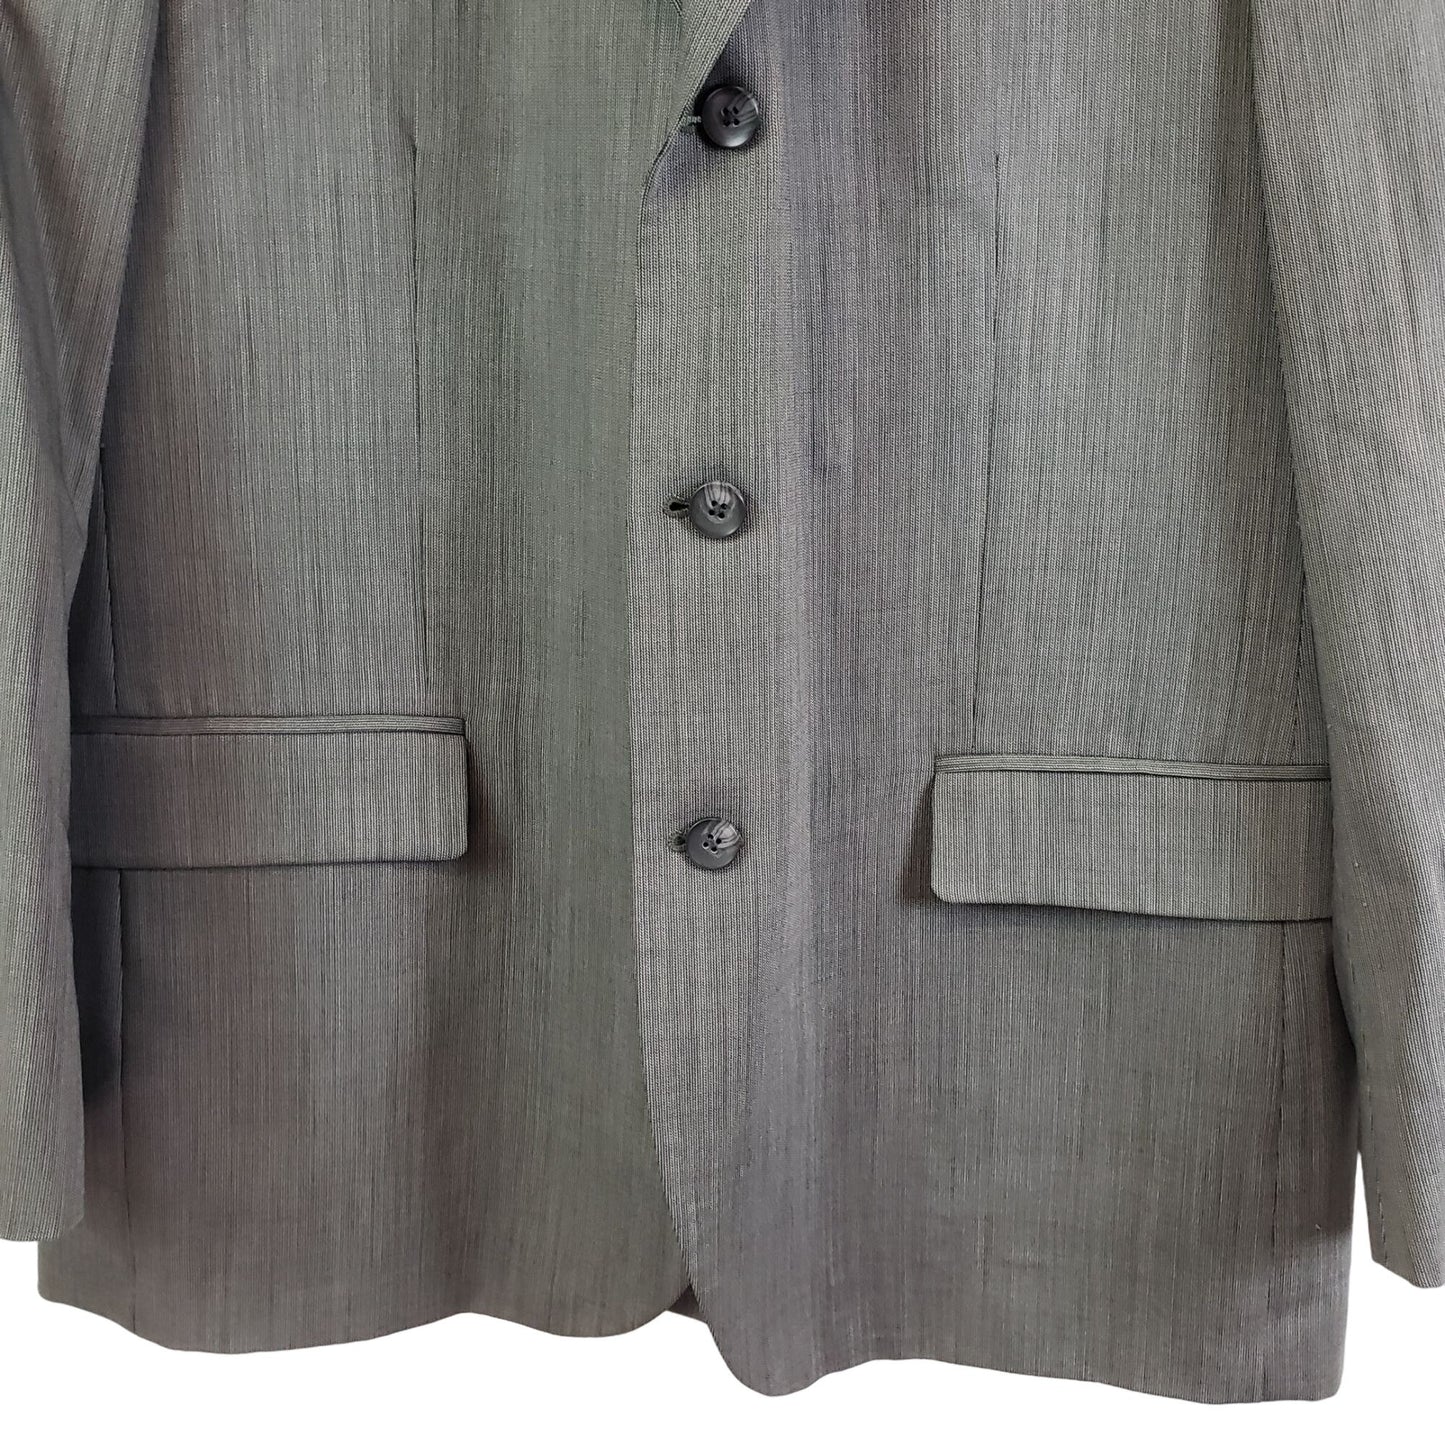 Slates Three Button Wool Suit Jacket Size 44R